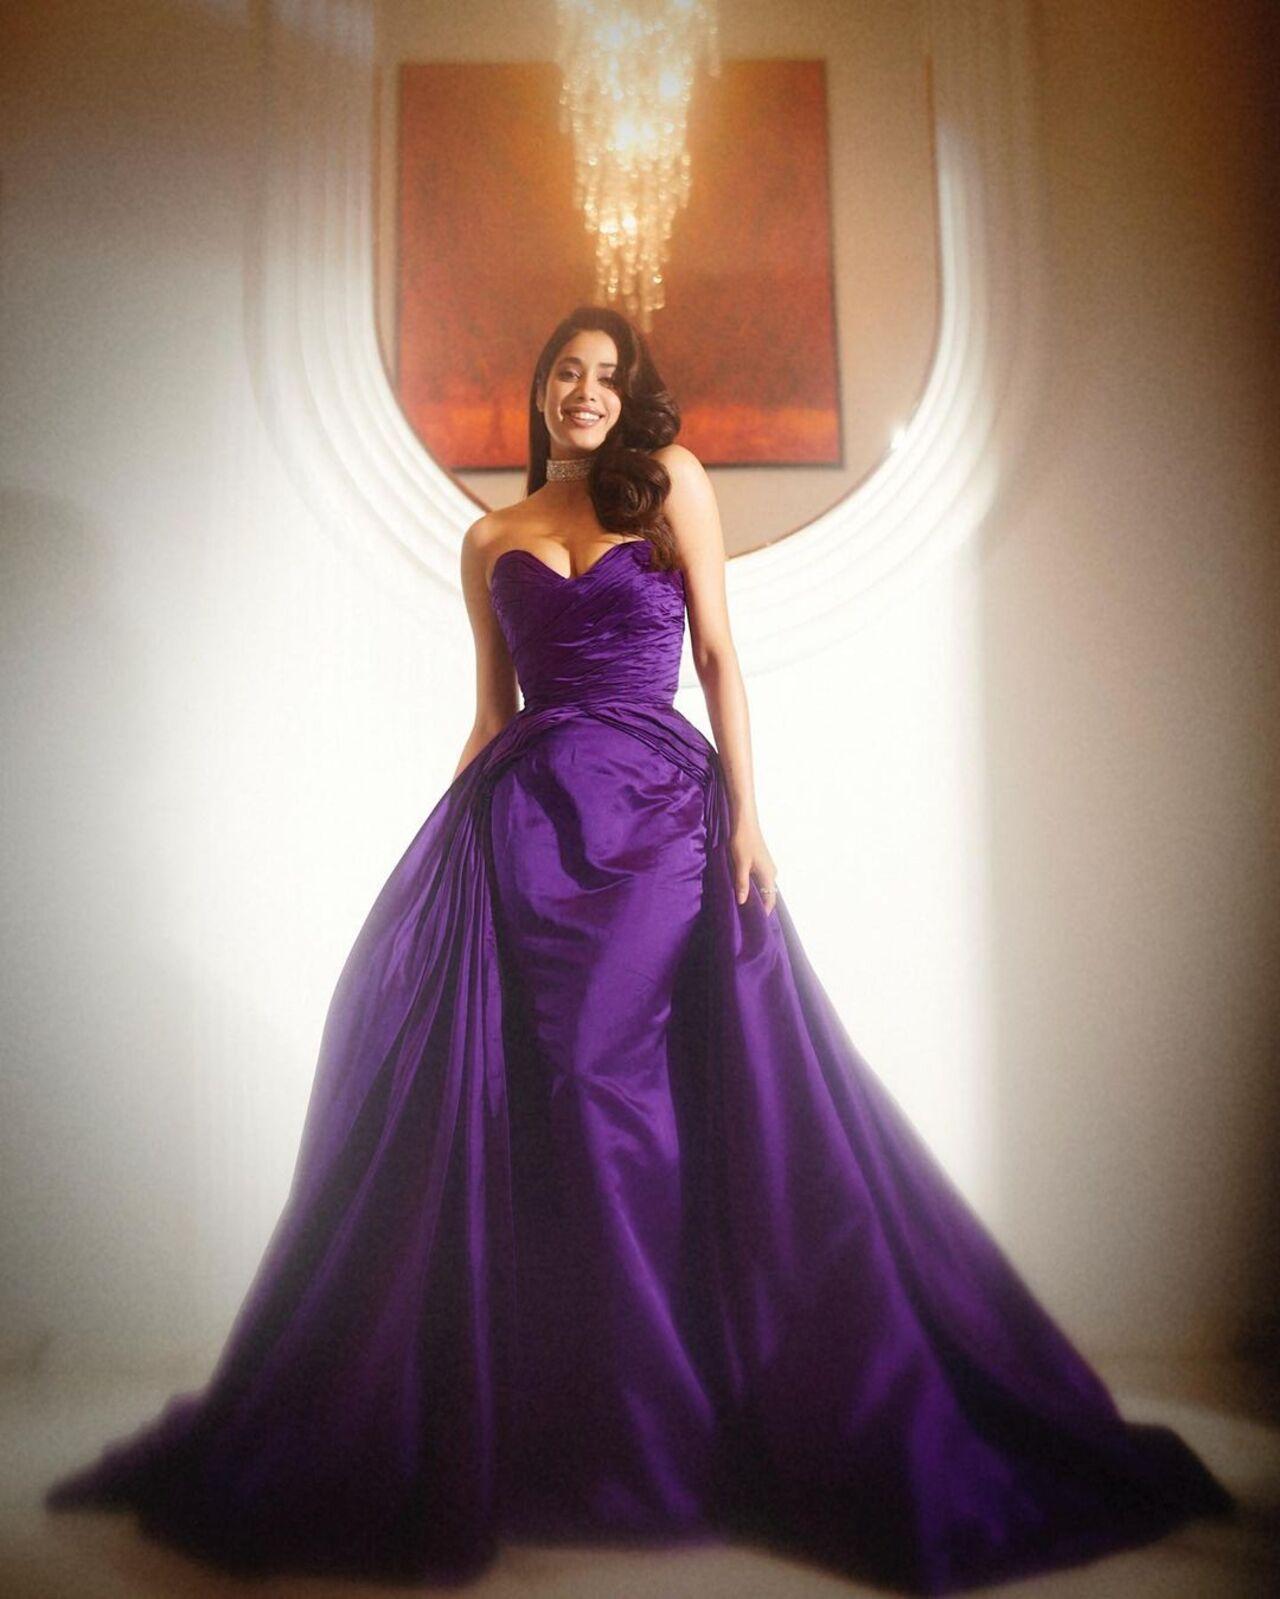 Janhvi Kapoor exuded royalty and a modern world charm in a purple ballroom-style gown for Filmfare Awards this year (Source/ Janhvi Kapoor Instagram)